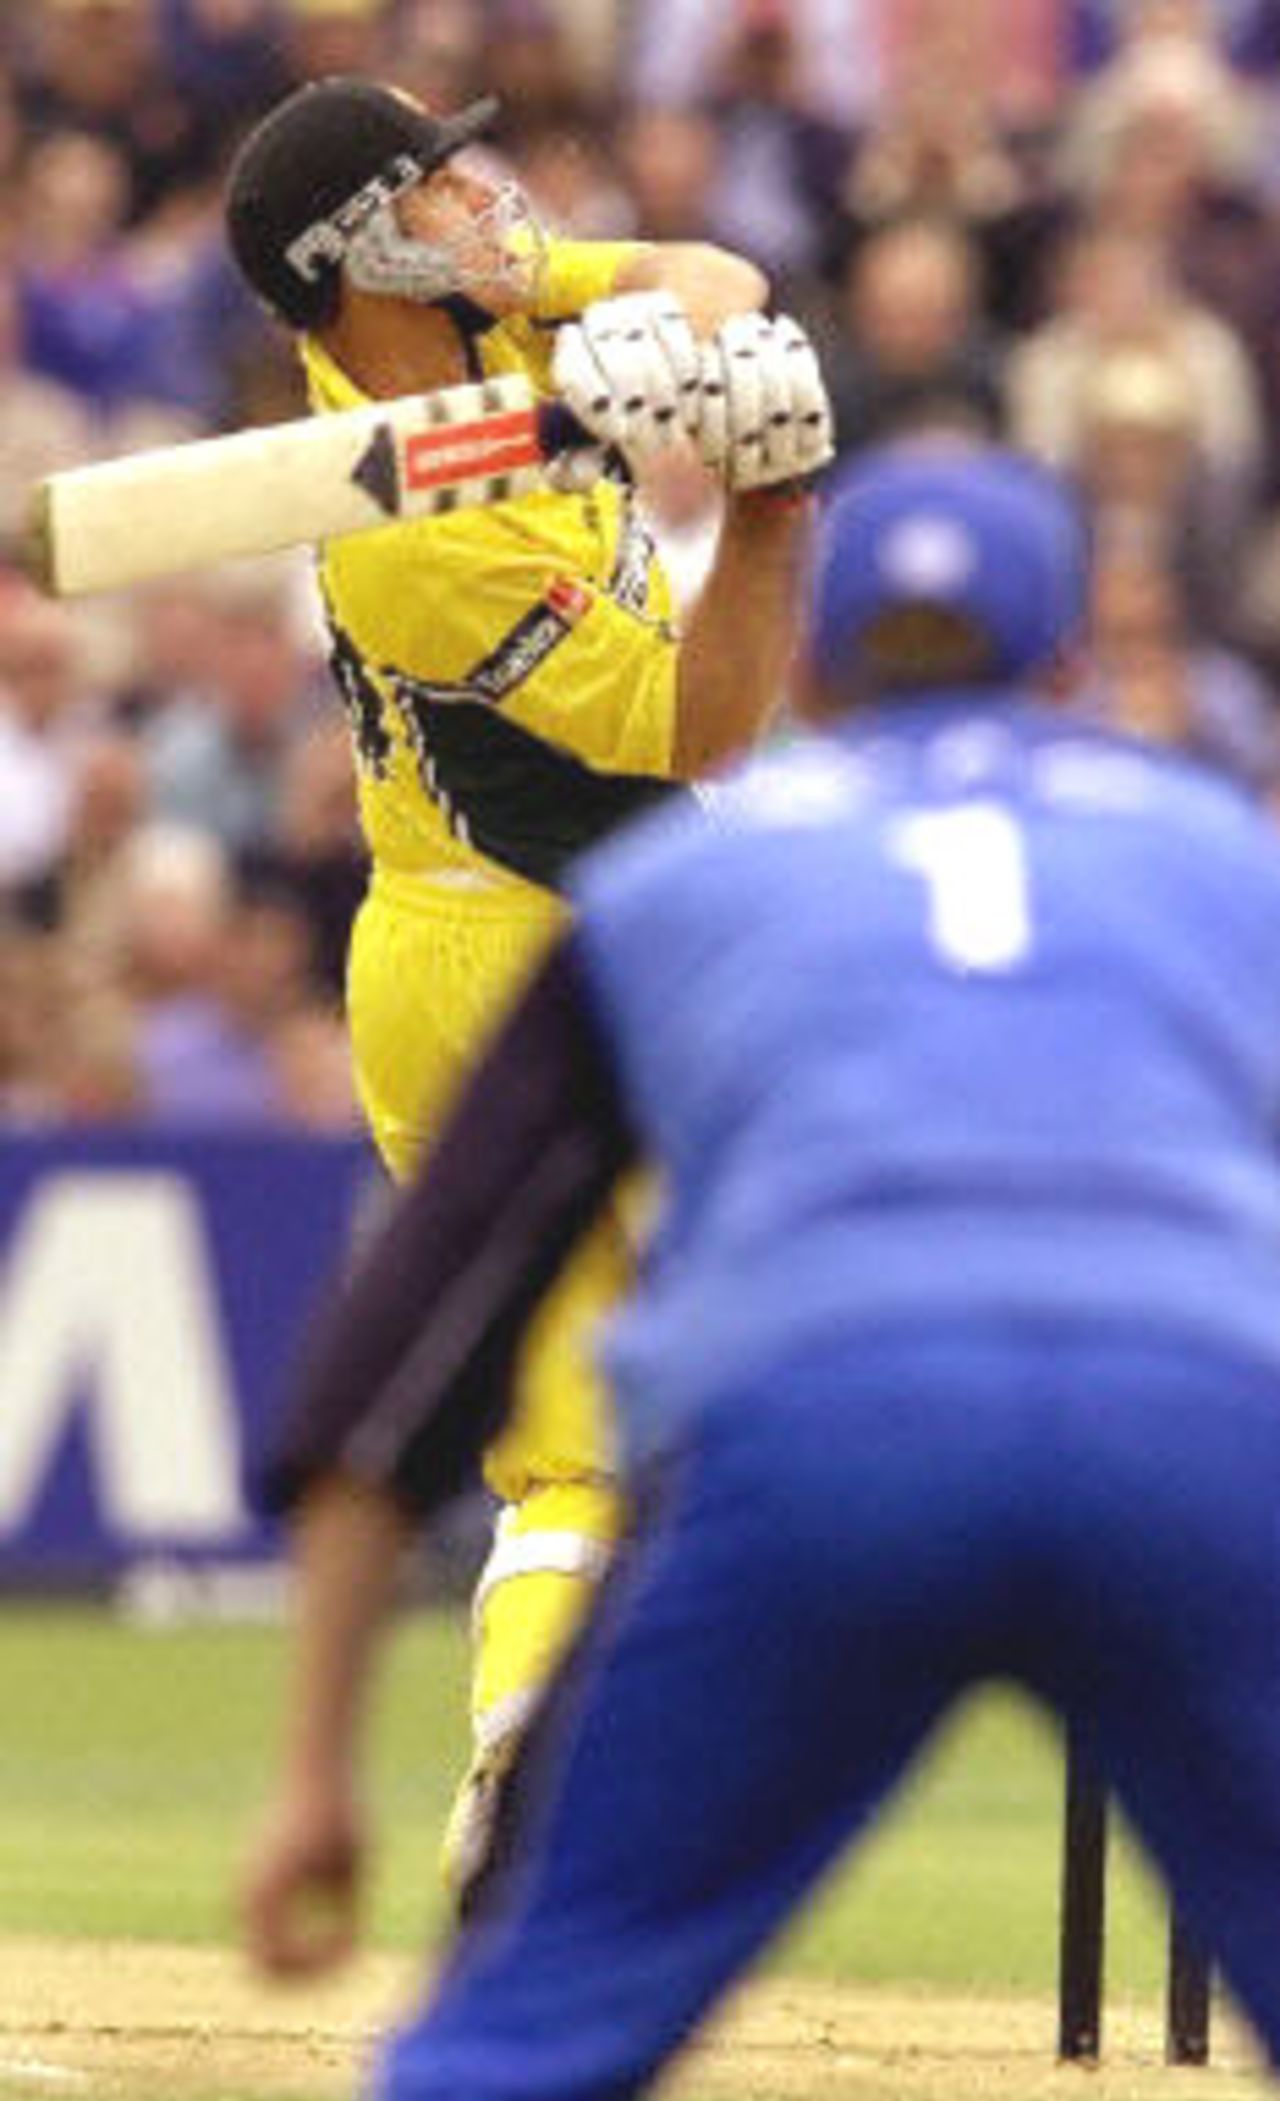 Matthew Hayden hooks only to be caught on the boundary for a duck as Nick Knight looks on, 5th ODI at Old Trafford,14 June 2001.